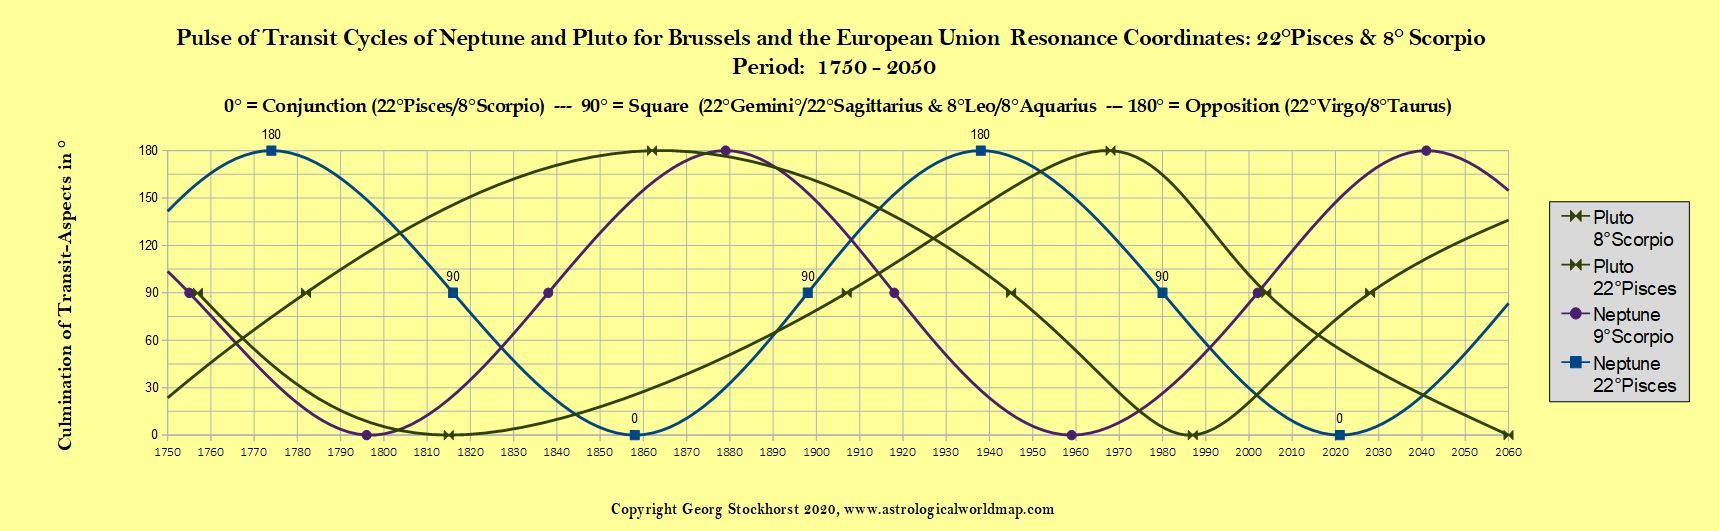 The EU and Brussels in Astrology